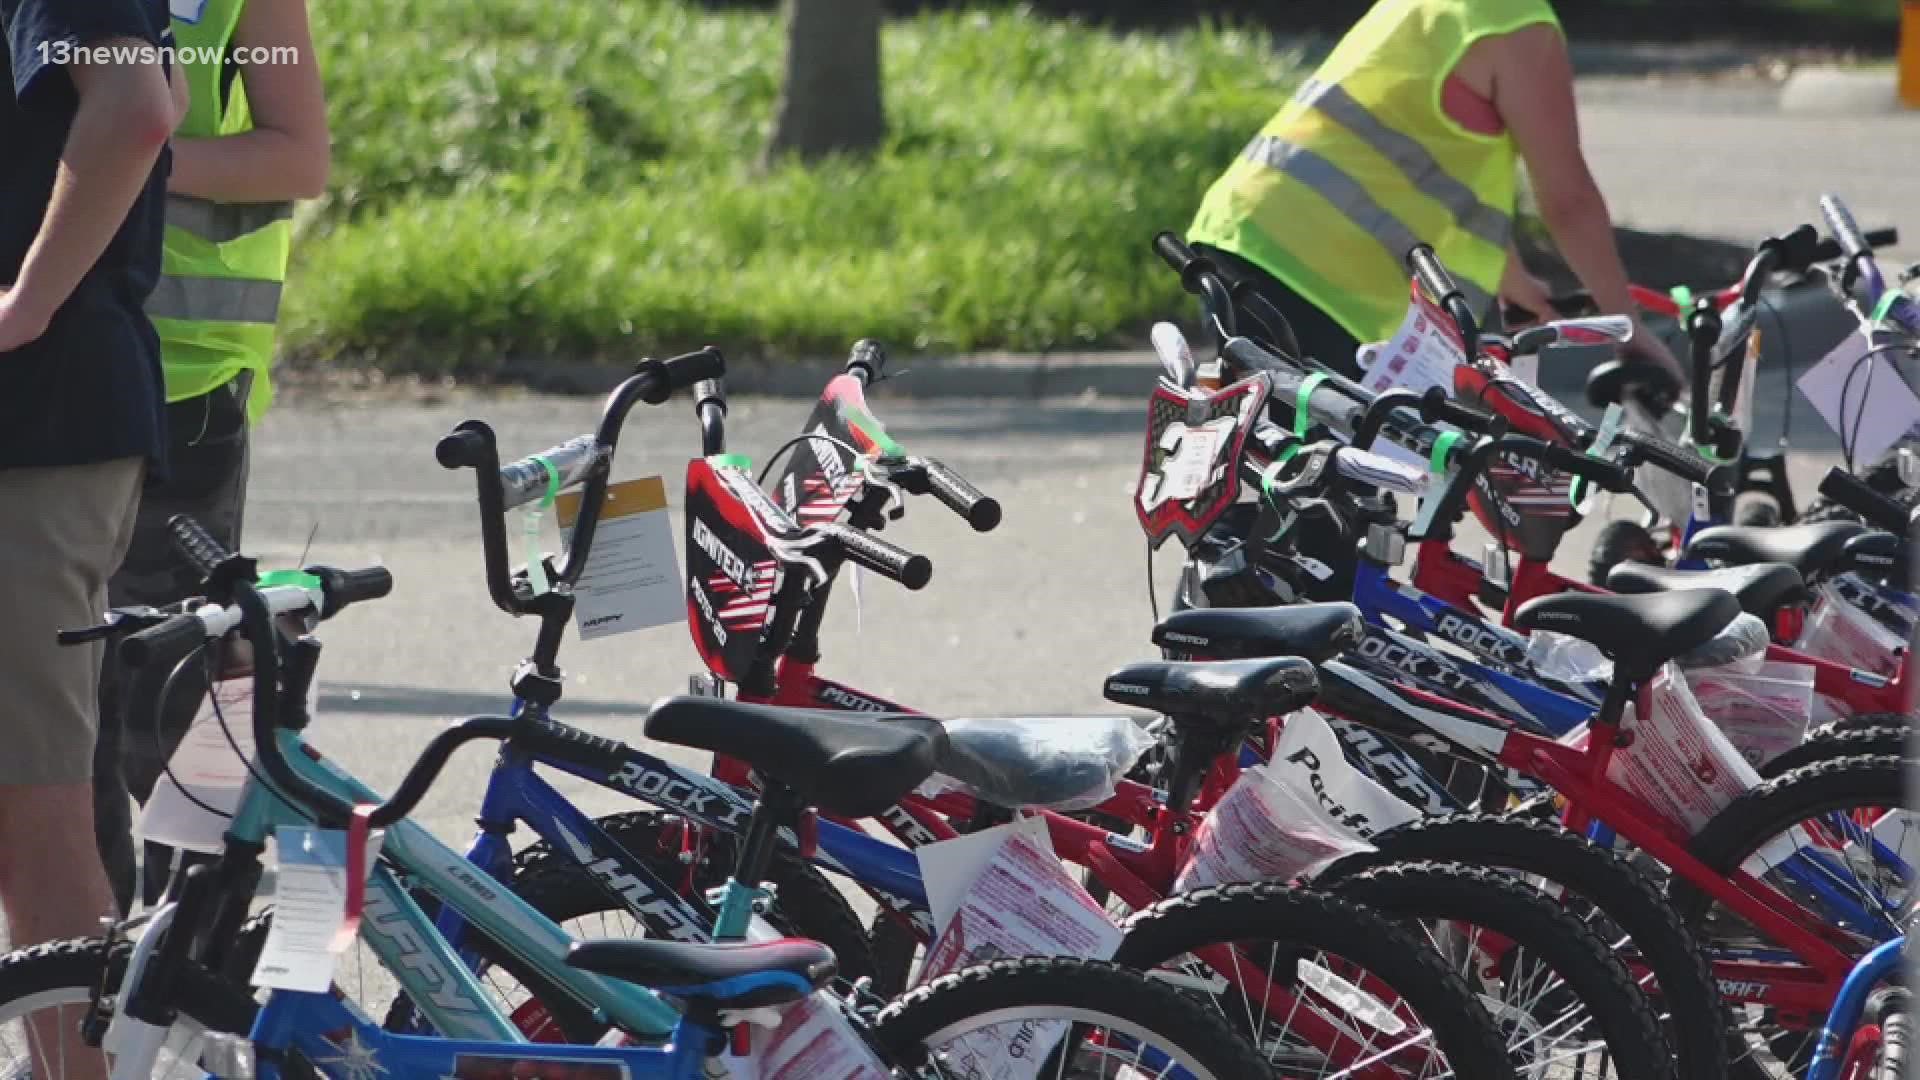 The event was called the "Bikes For Tykes Rodeo."